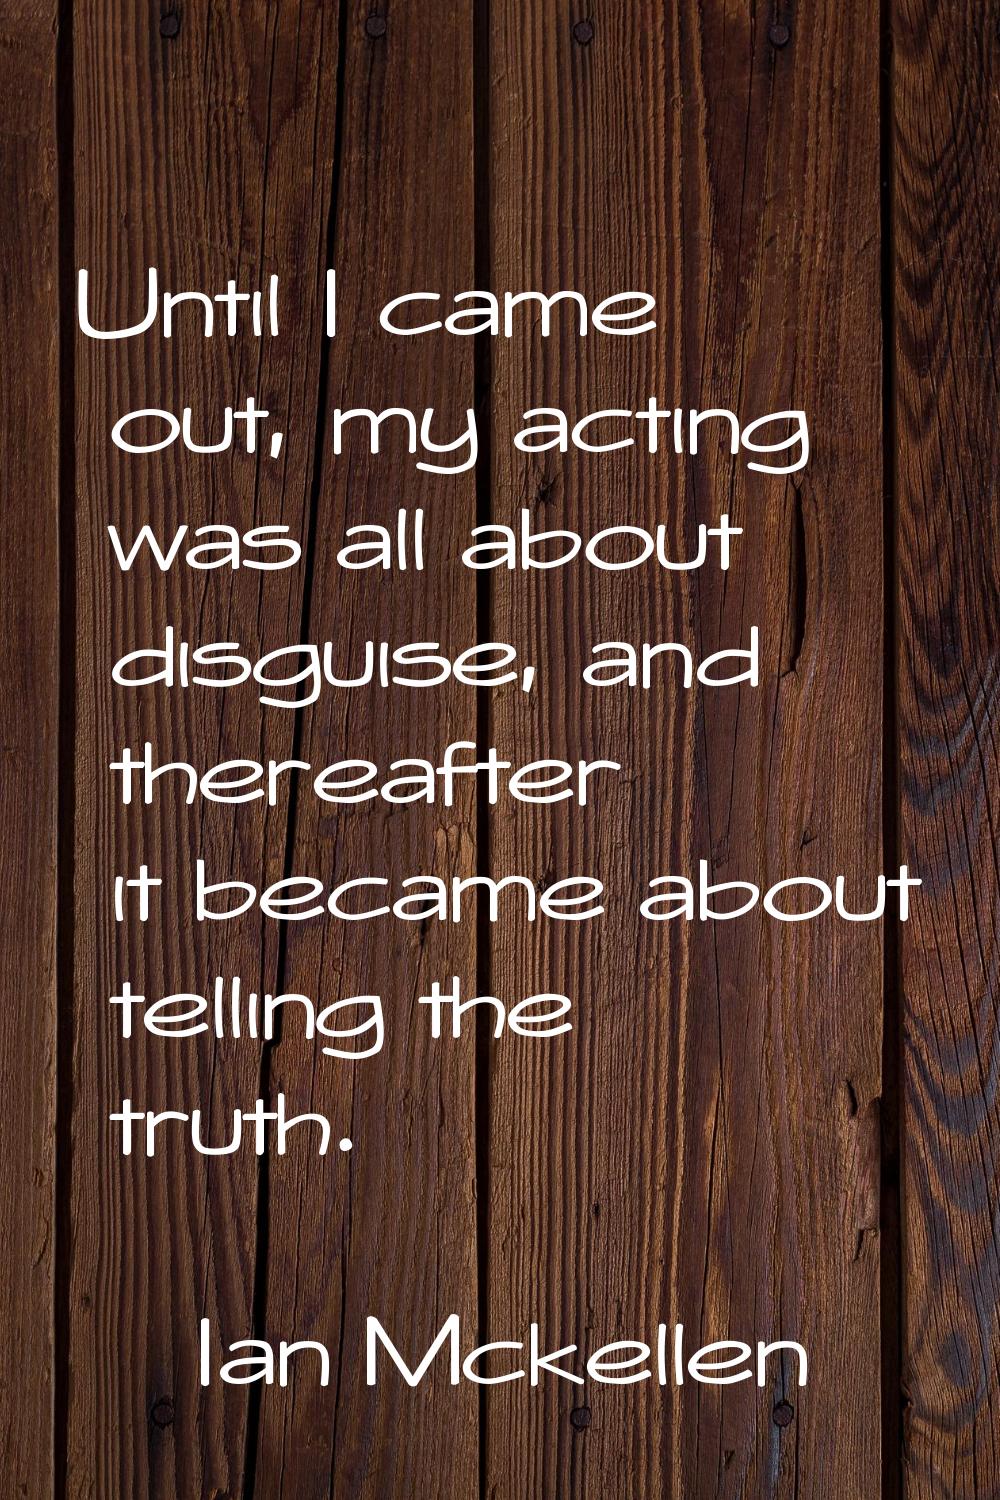 Until I came out, my acting was all about disguise, and thereafter it became about telling the trut